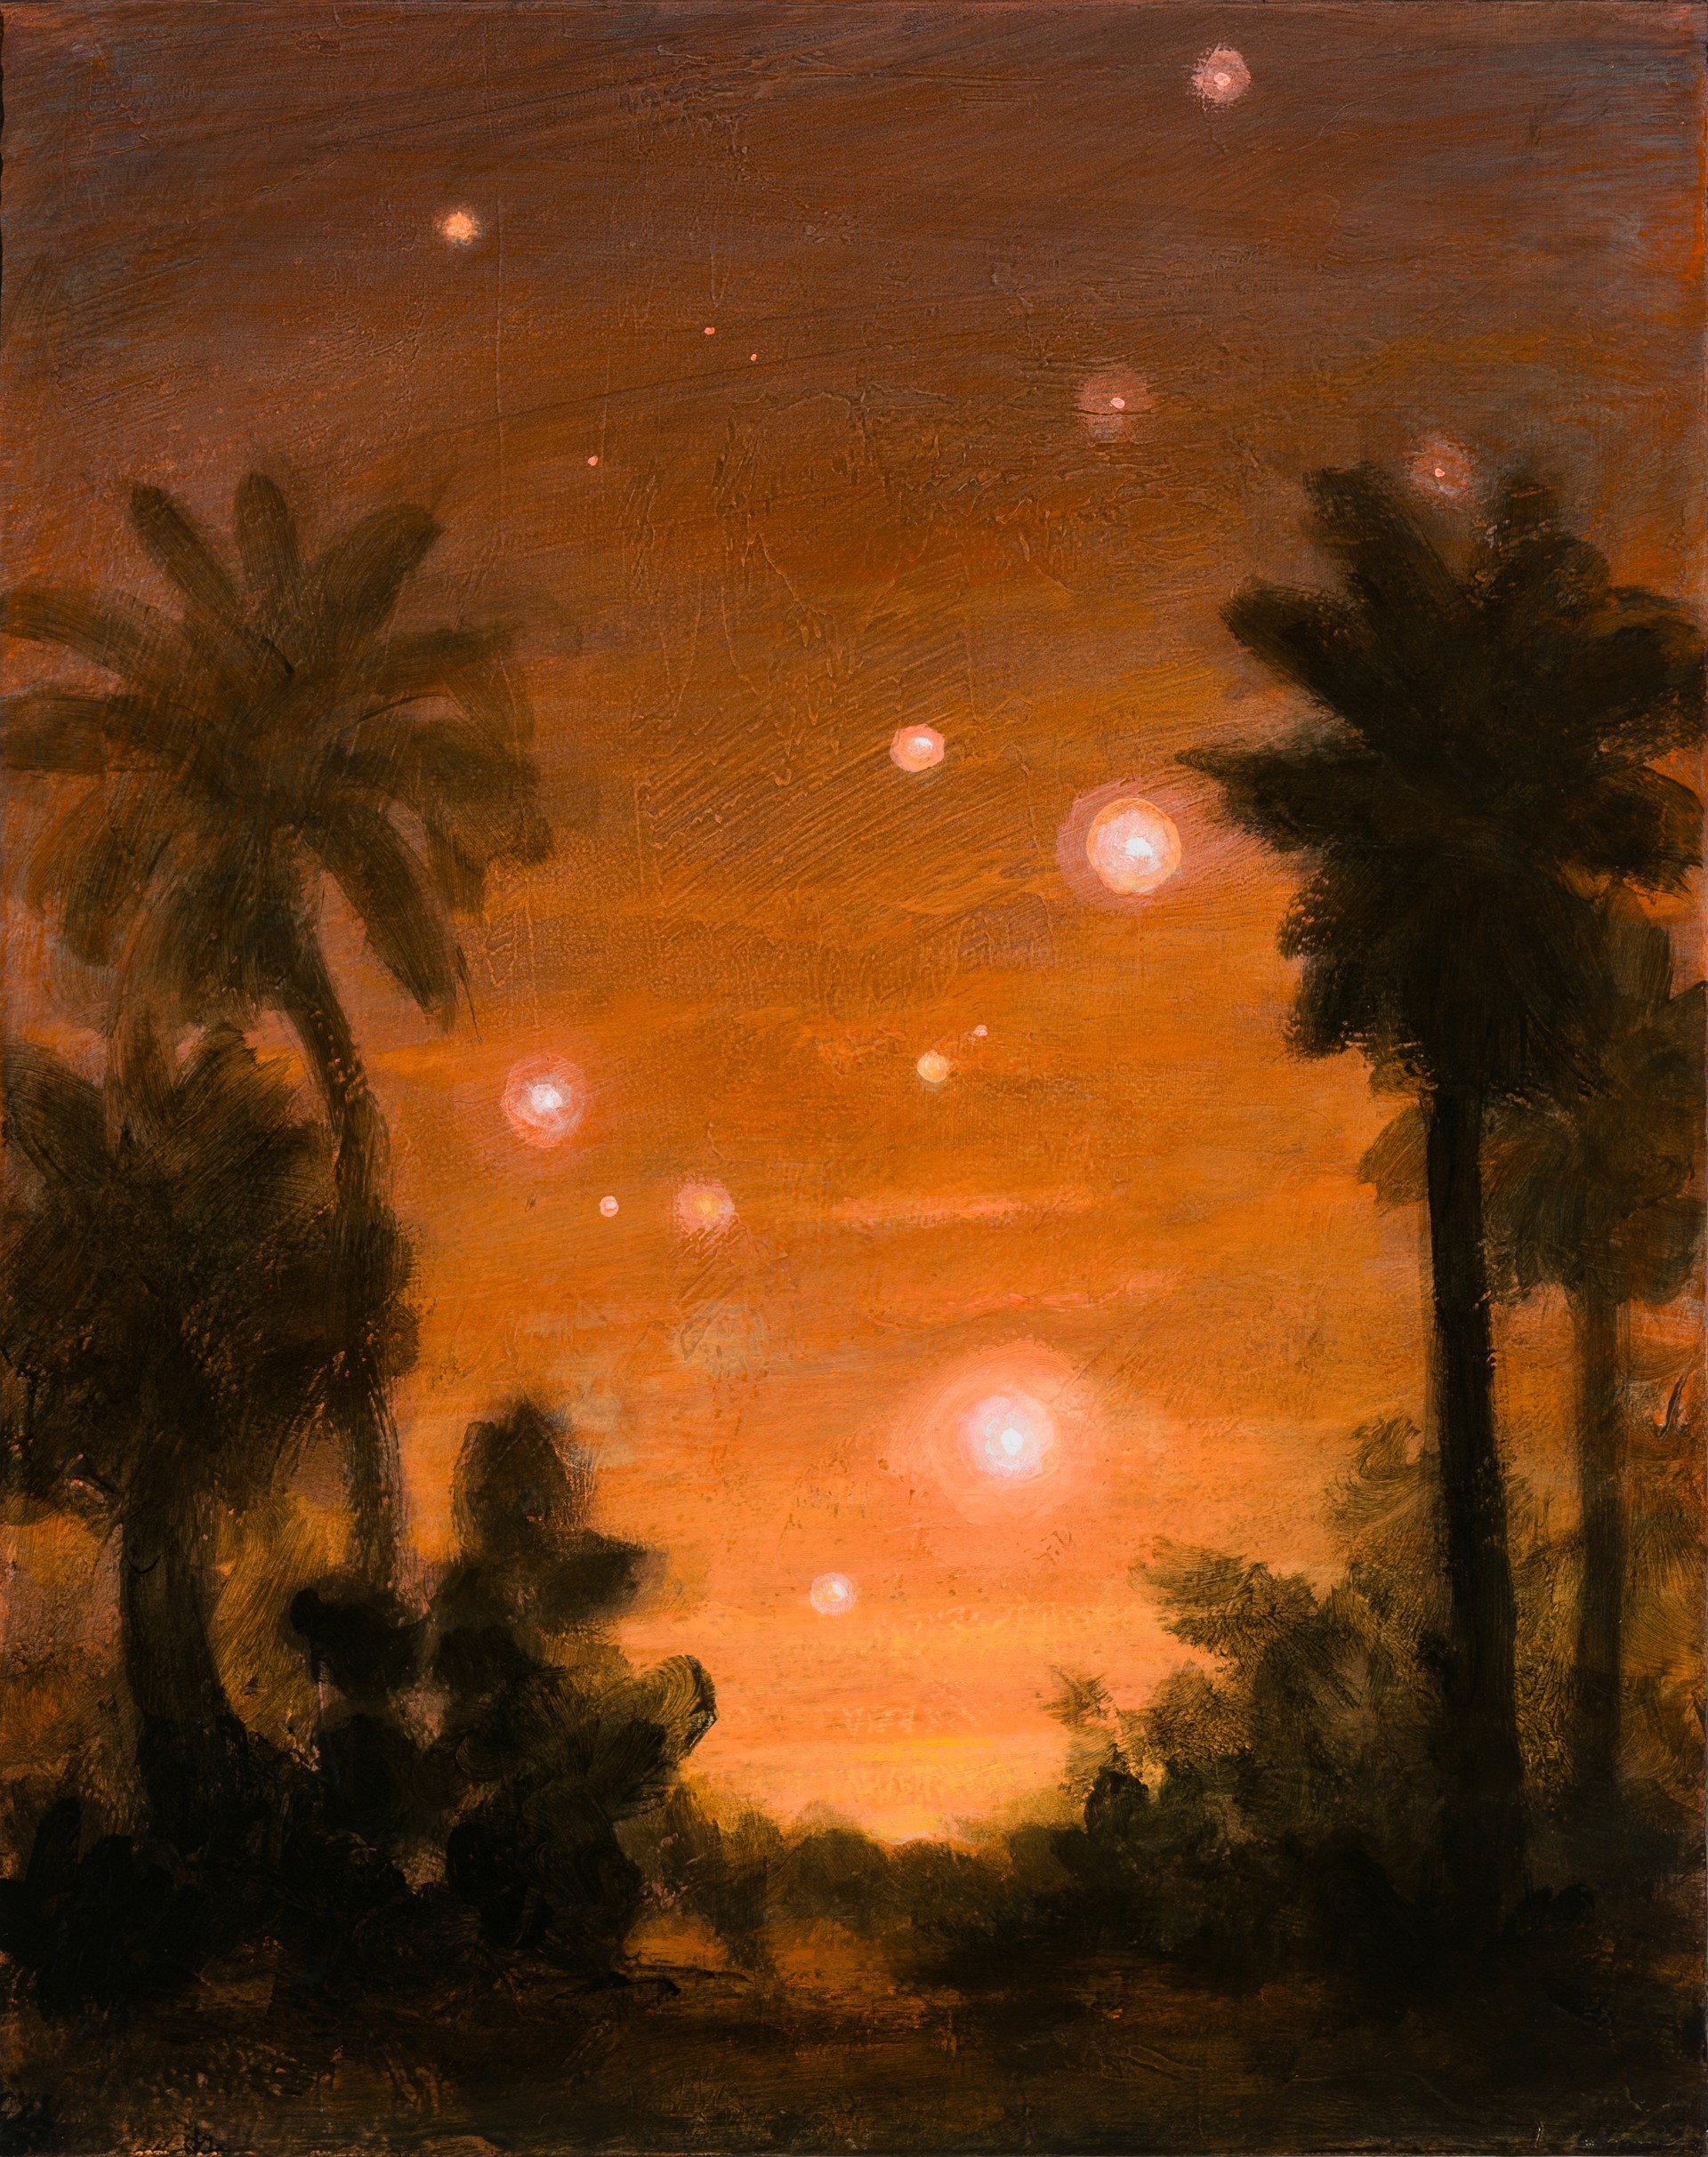 Celestial Bodies With Four Palm Trees by Kevin Sloan